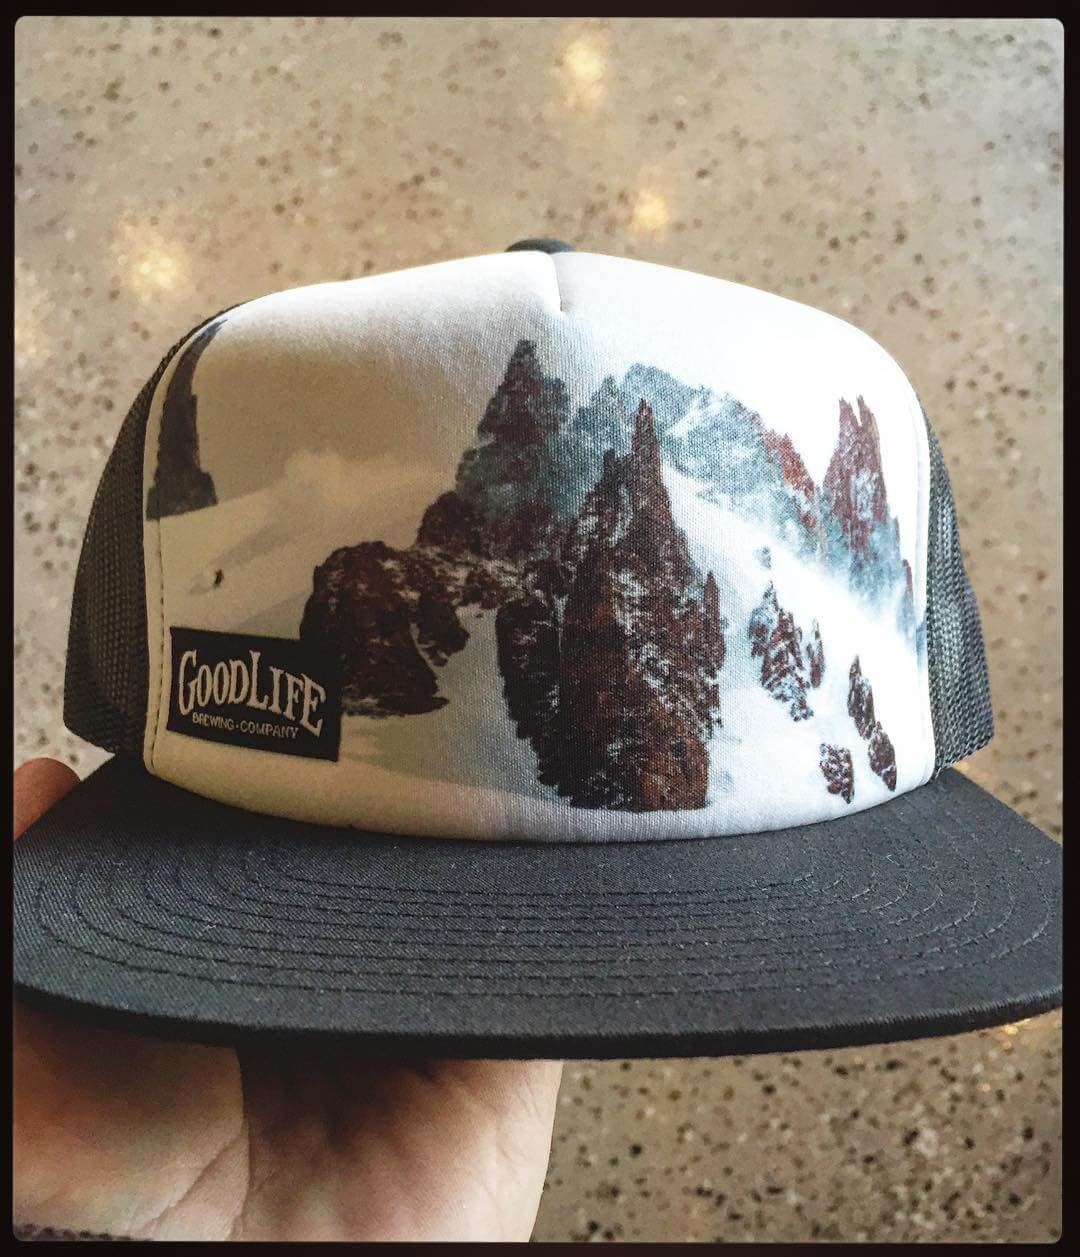 Check out the new hat we did in #collaboration with @pete_alport! Get one at the pub before they're gone!